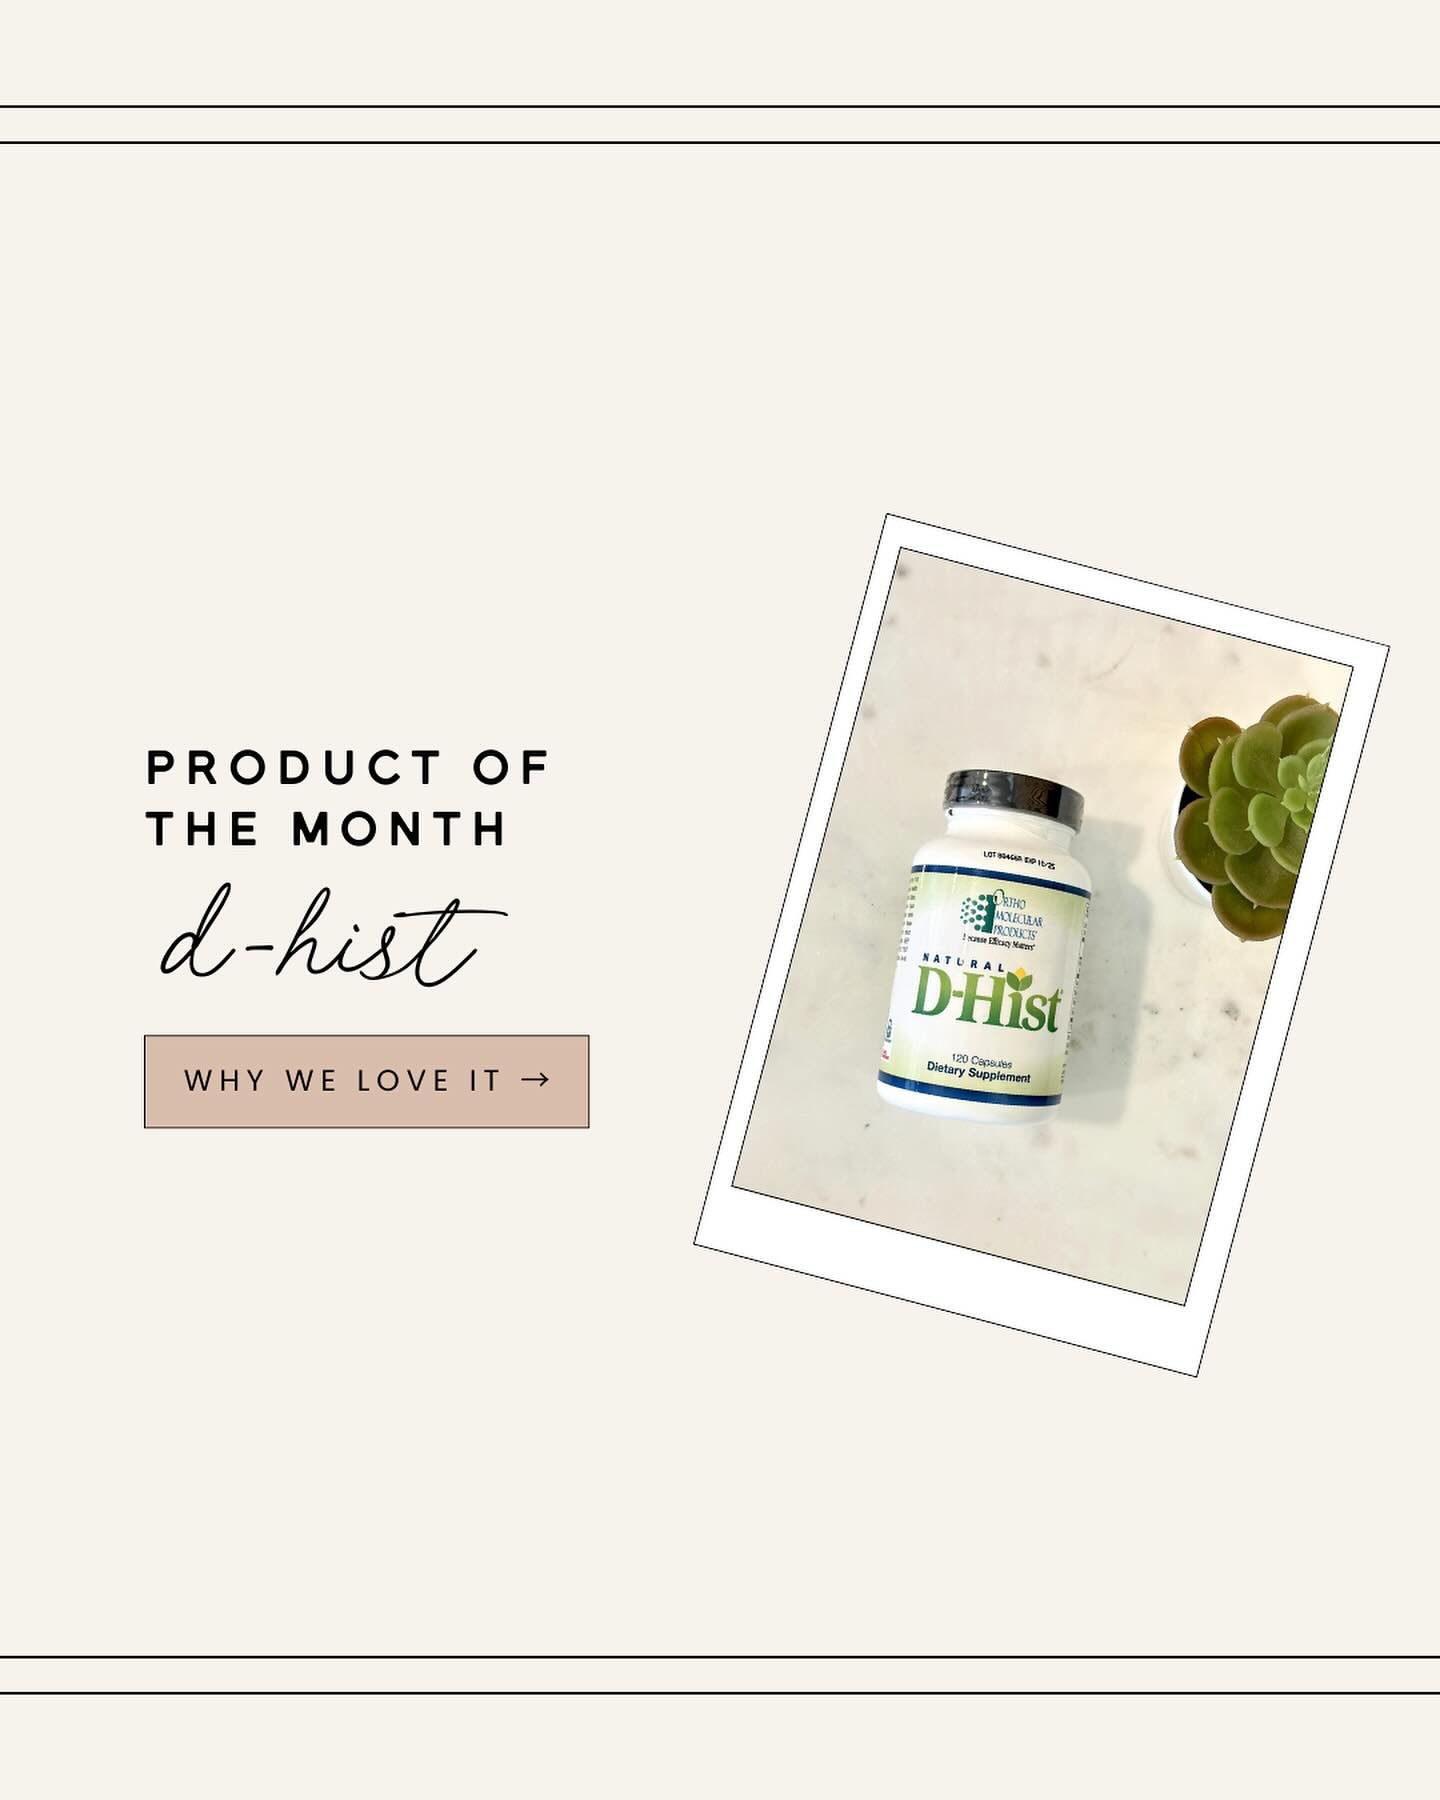 🌿 Beat Allergies with D-HIST 🌿

Our favorite product for overcoming seasonal allergies is D-HIST☀️

D-HIST has soooo many benefits: it&rsquo;s combination of natural ingredients help support healthy nasal passages, sinuses, and respiratory systems!